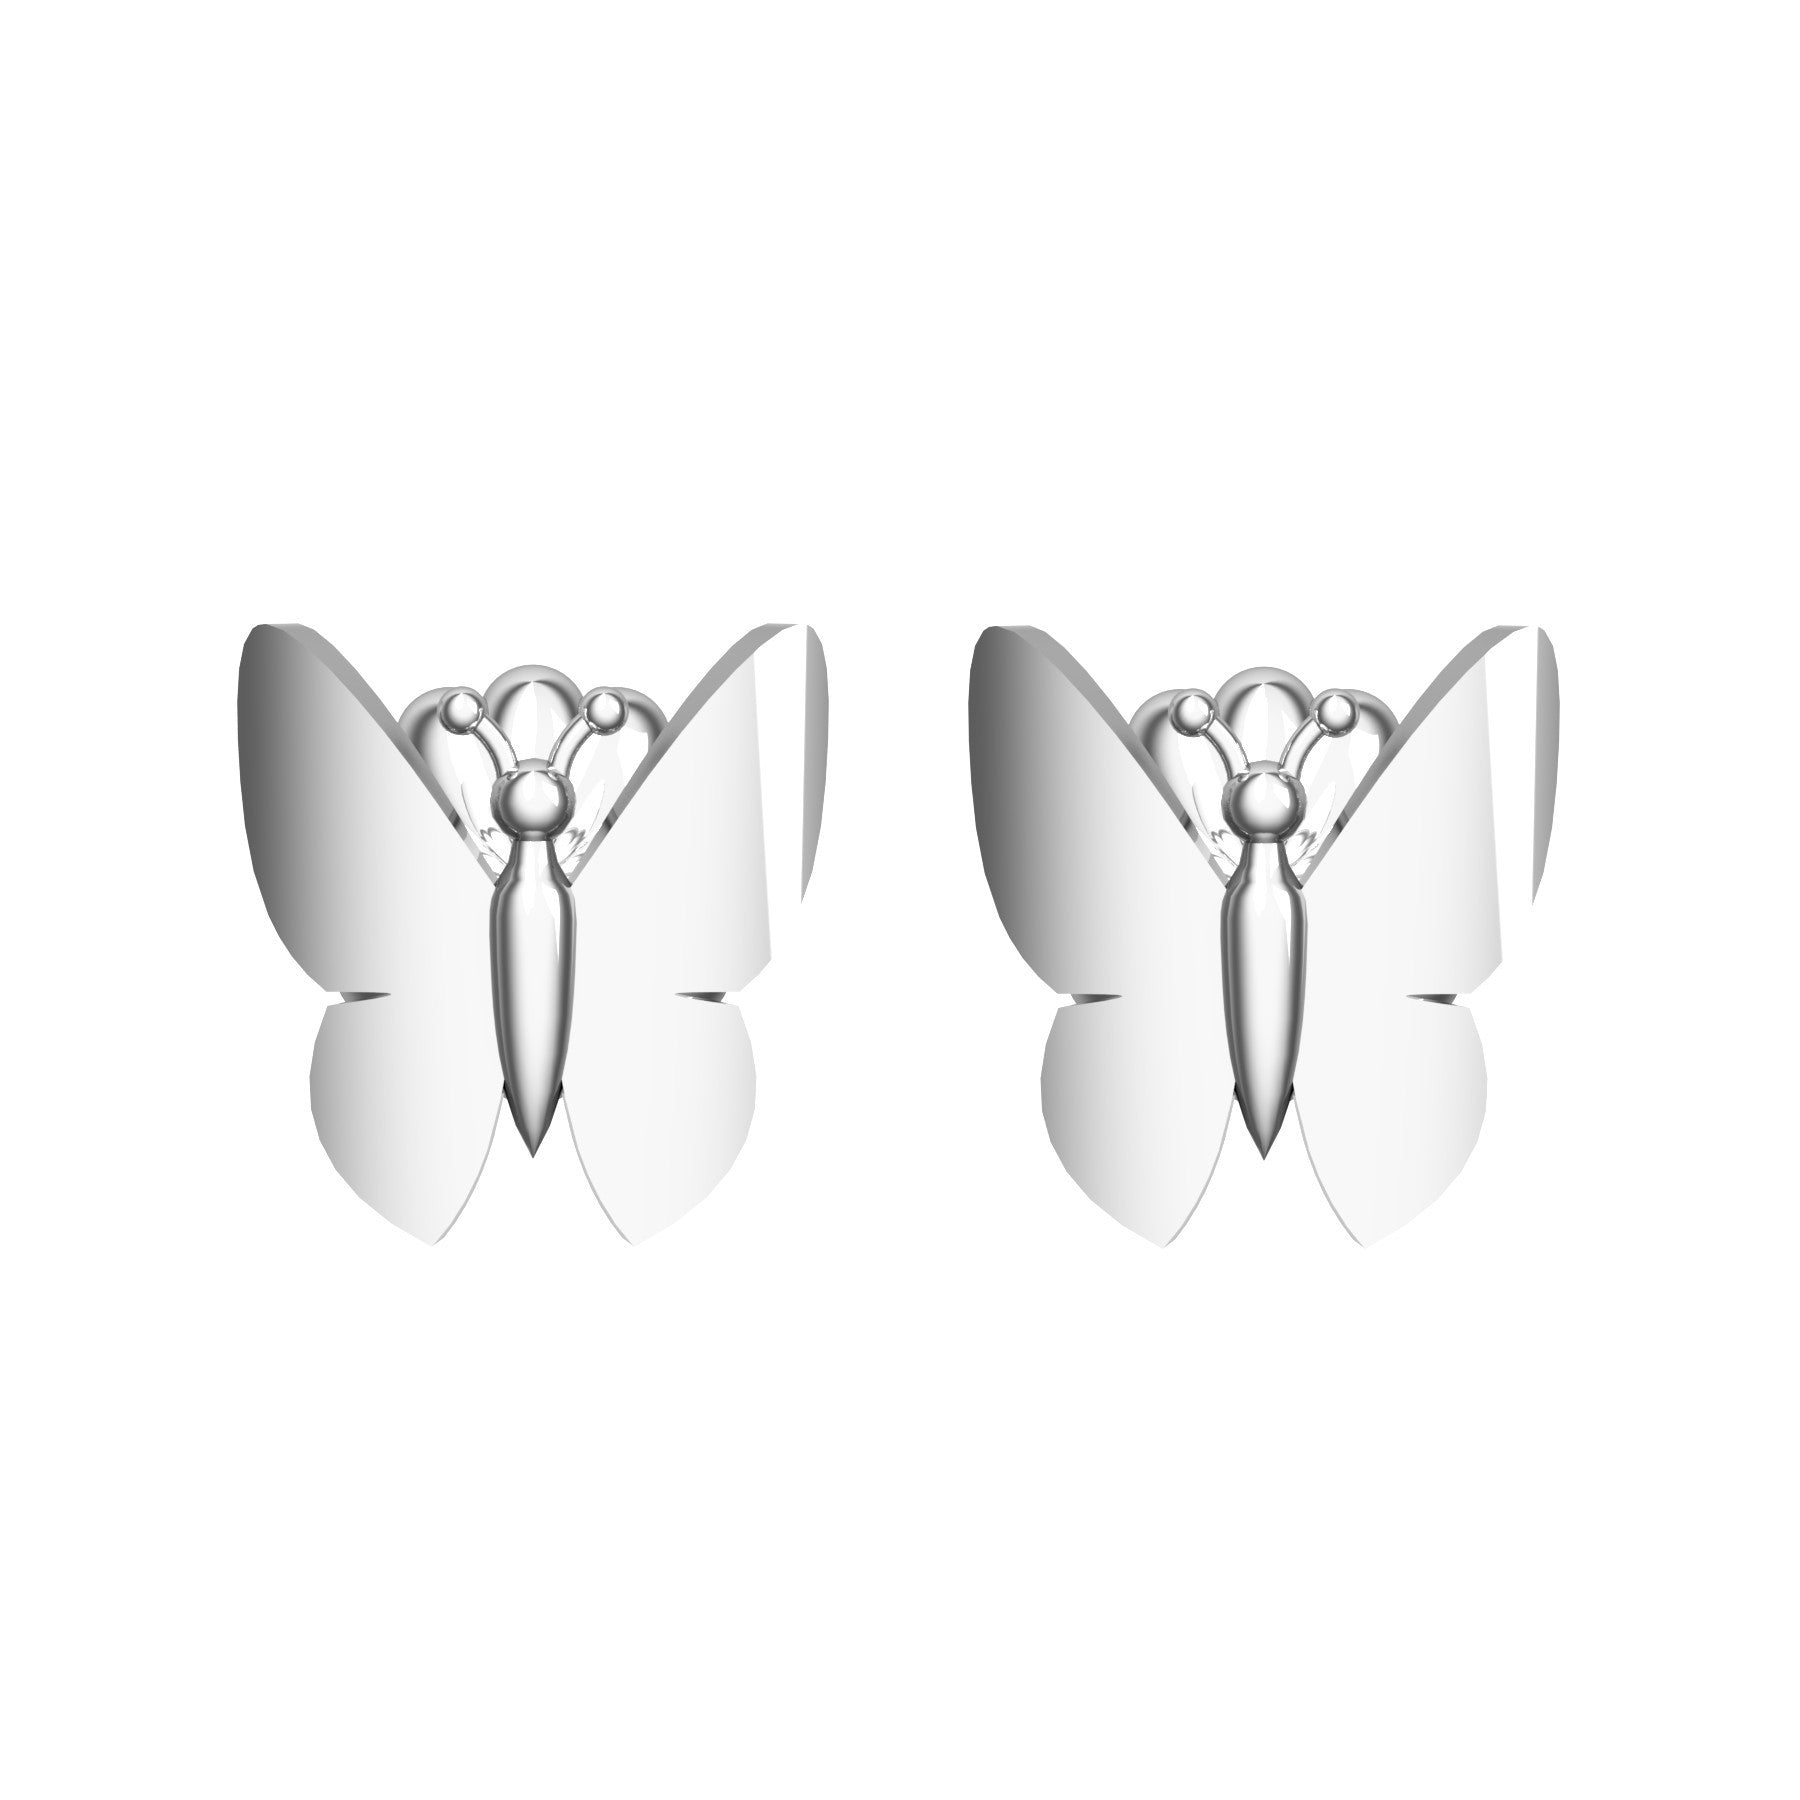 butterfly earrings, sterling silver, weight about 1,5 g (0.05 oz), size 10x9 mm 